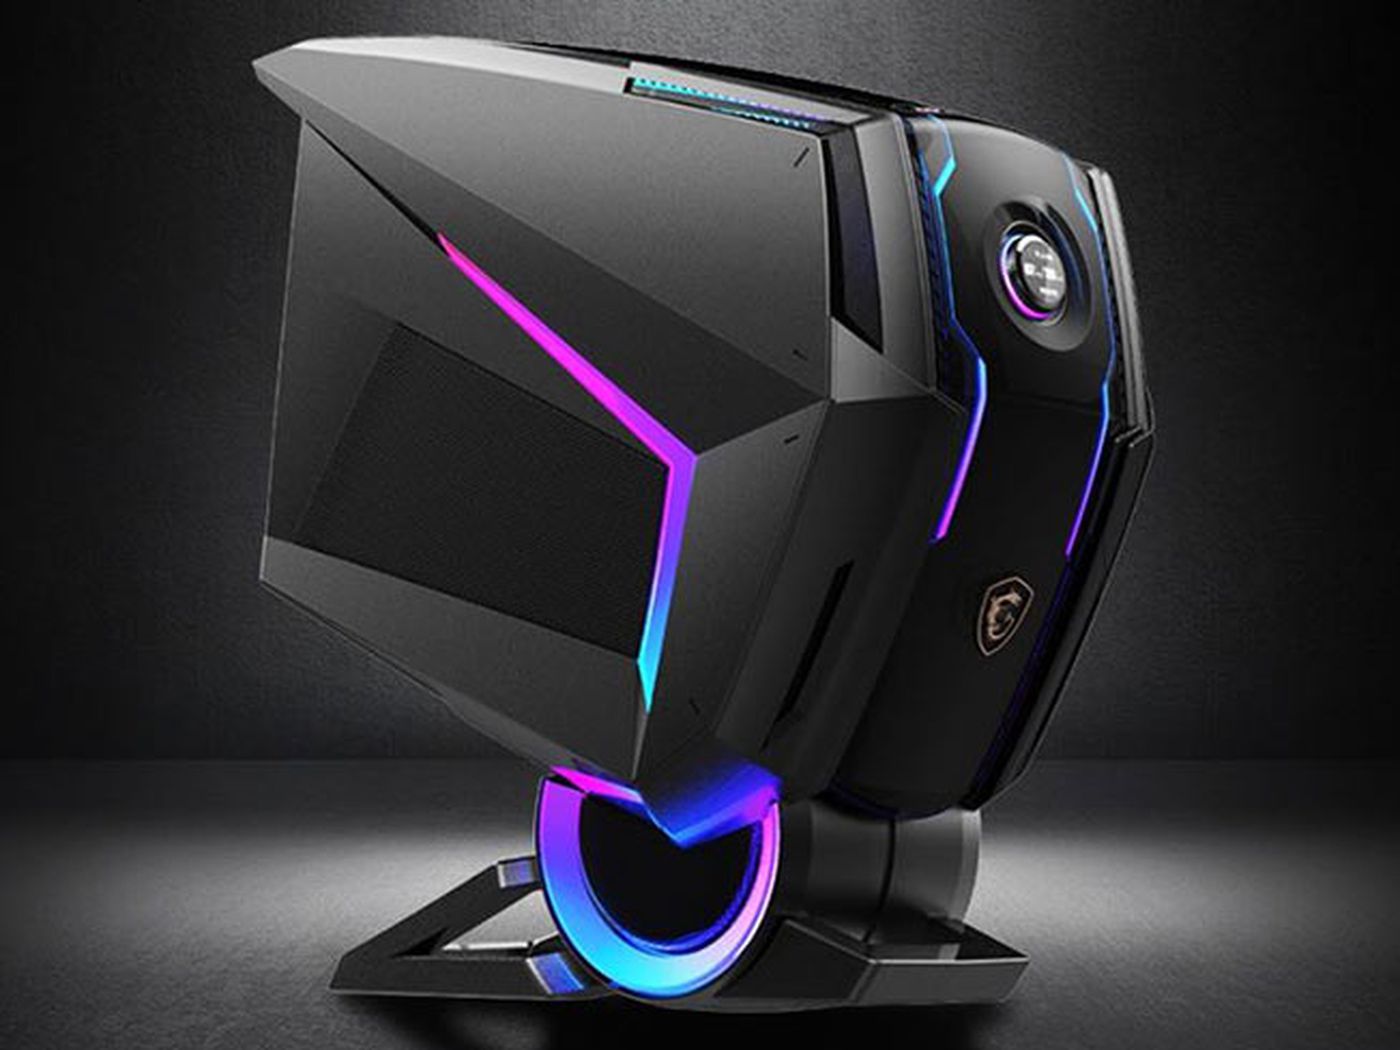 Msi S New Gaming Pc Looks Like A Robot Head